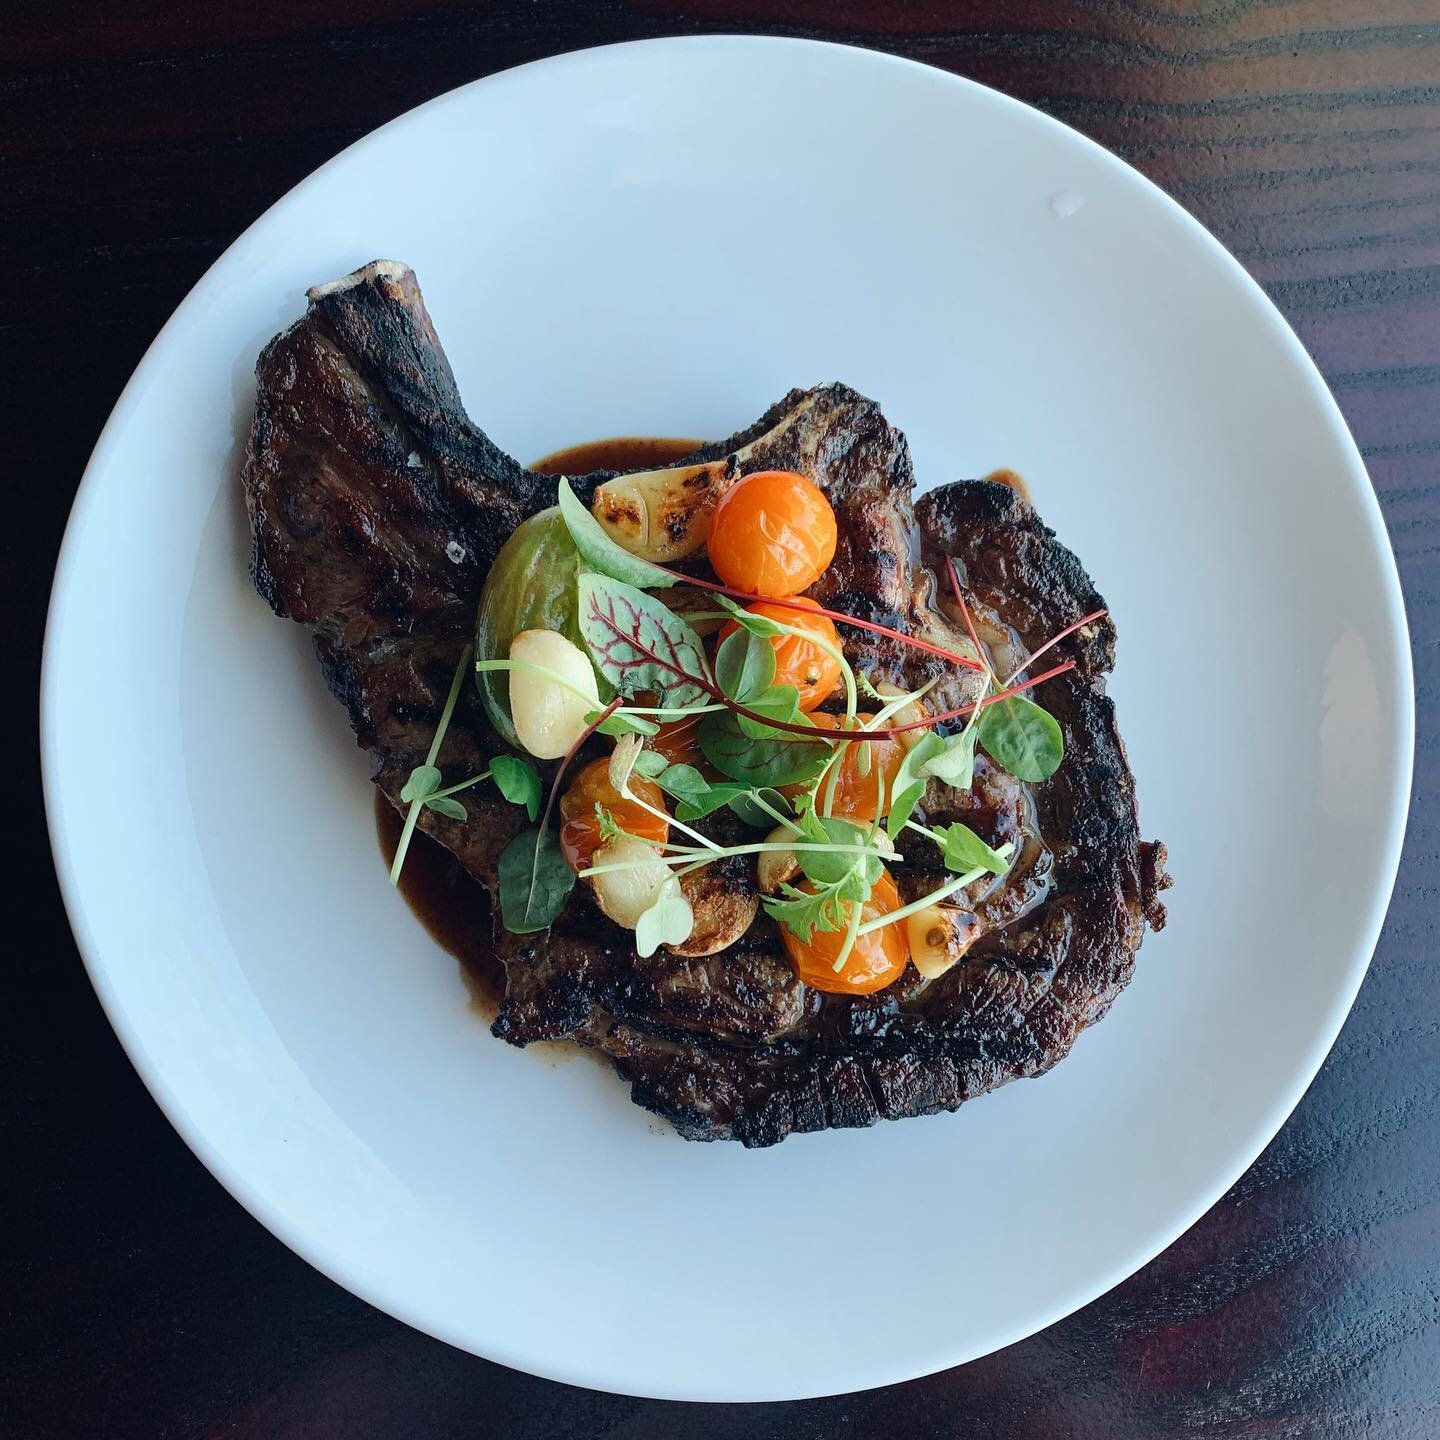 Last night&rsquo;s bourbon bone-in prime rib special sold out before we could even post about it! Stop in any night to check out the rotating chef&rsquo;s special and fresh catch - our best sellers.